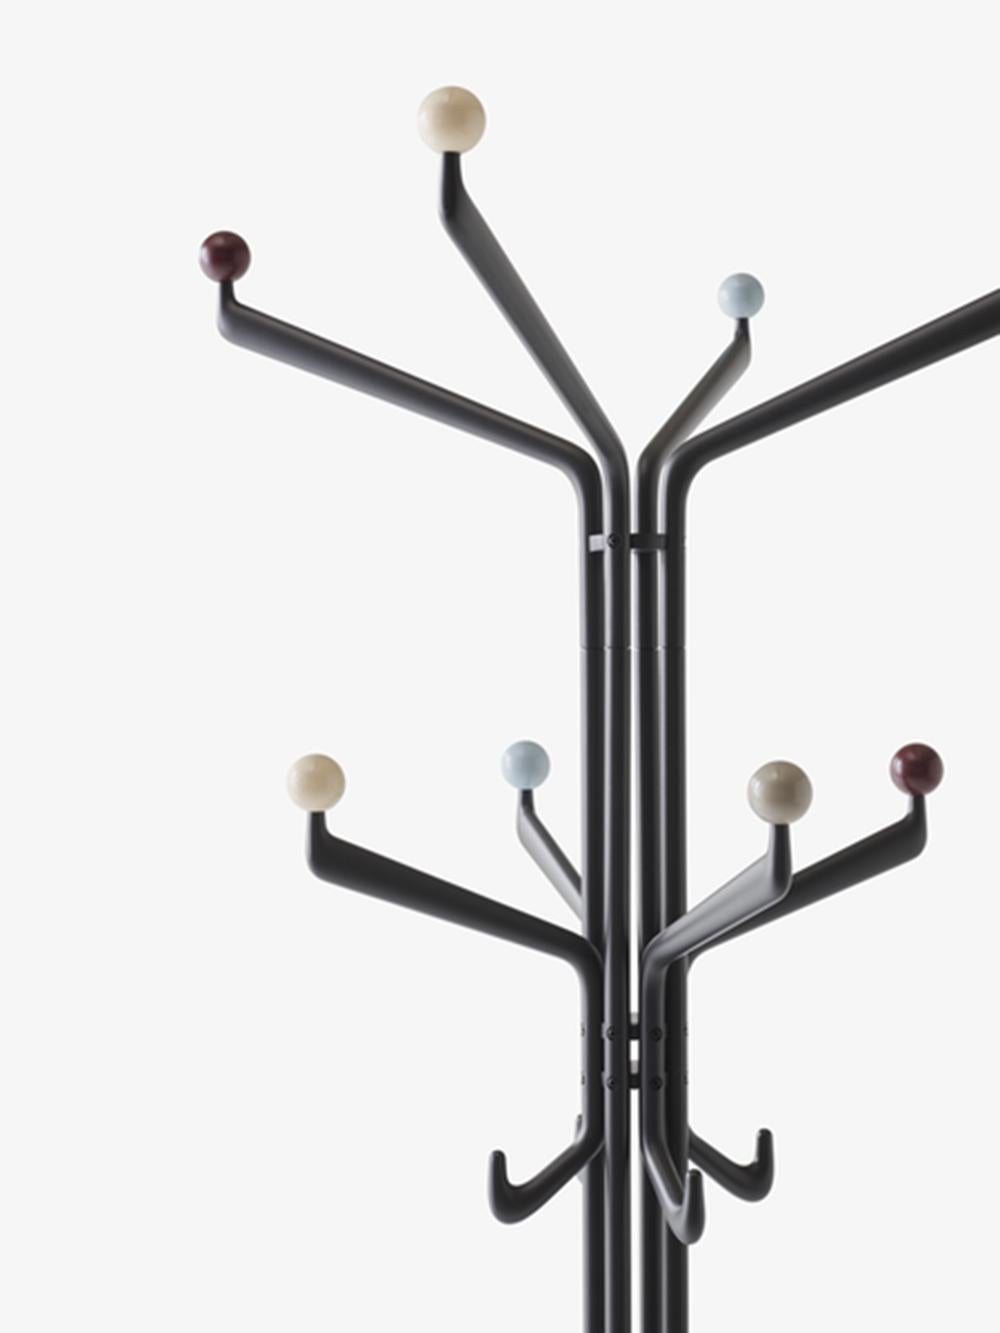 The Capture coat stand is a sophisticated design that will stand out in an interior. Ideal for both contract and retail spaces, this three-tiered piece offers a sculptural take on a traditional piece of furniture, with arms that offer different